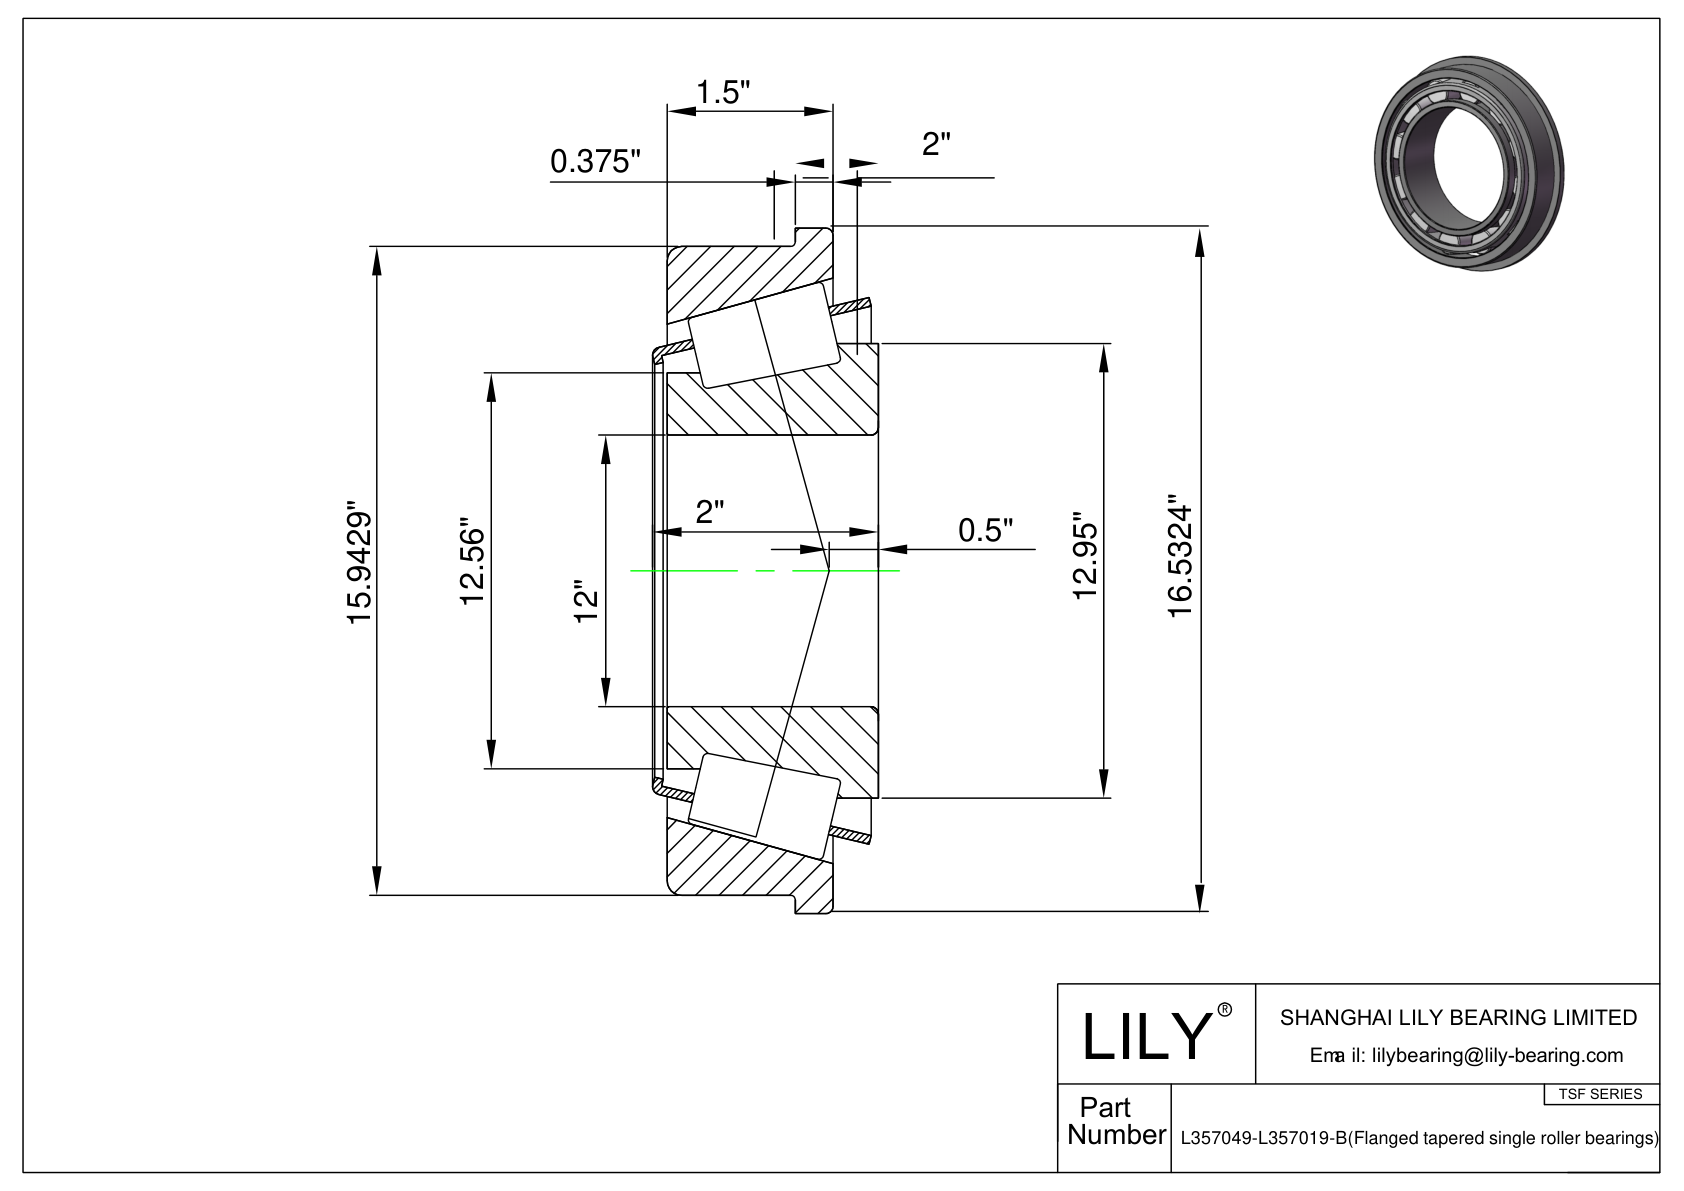 L357049-L357019-B TSF (Tapered Single Roller Bearings with Flange) (Imperial) cad drawing